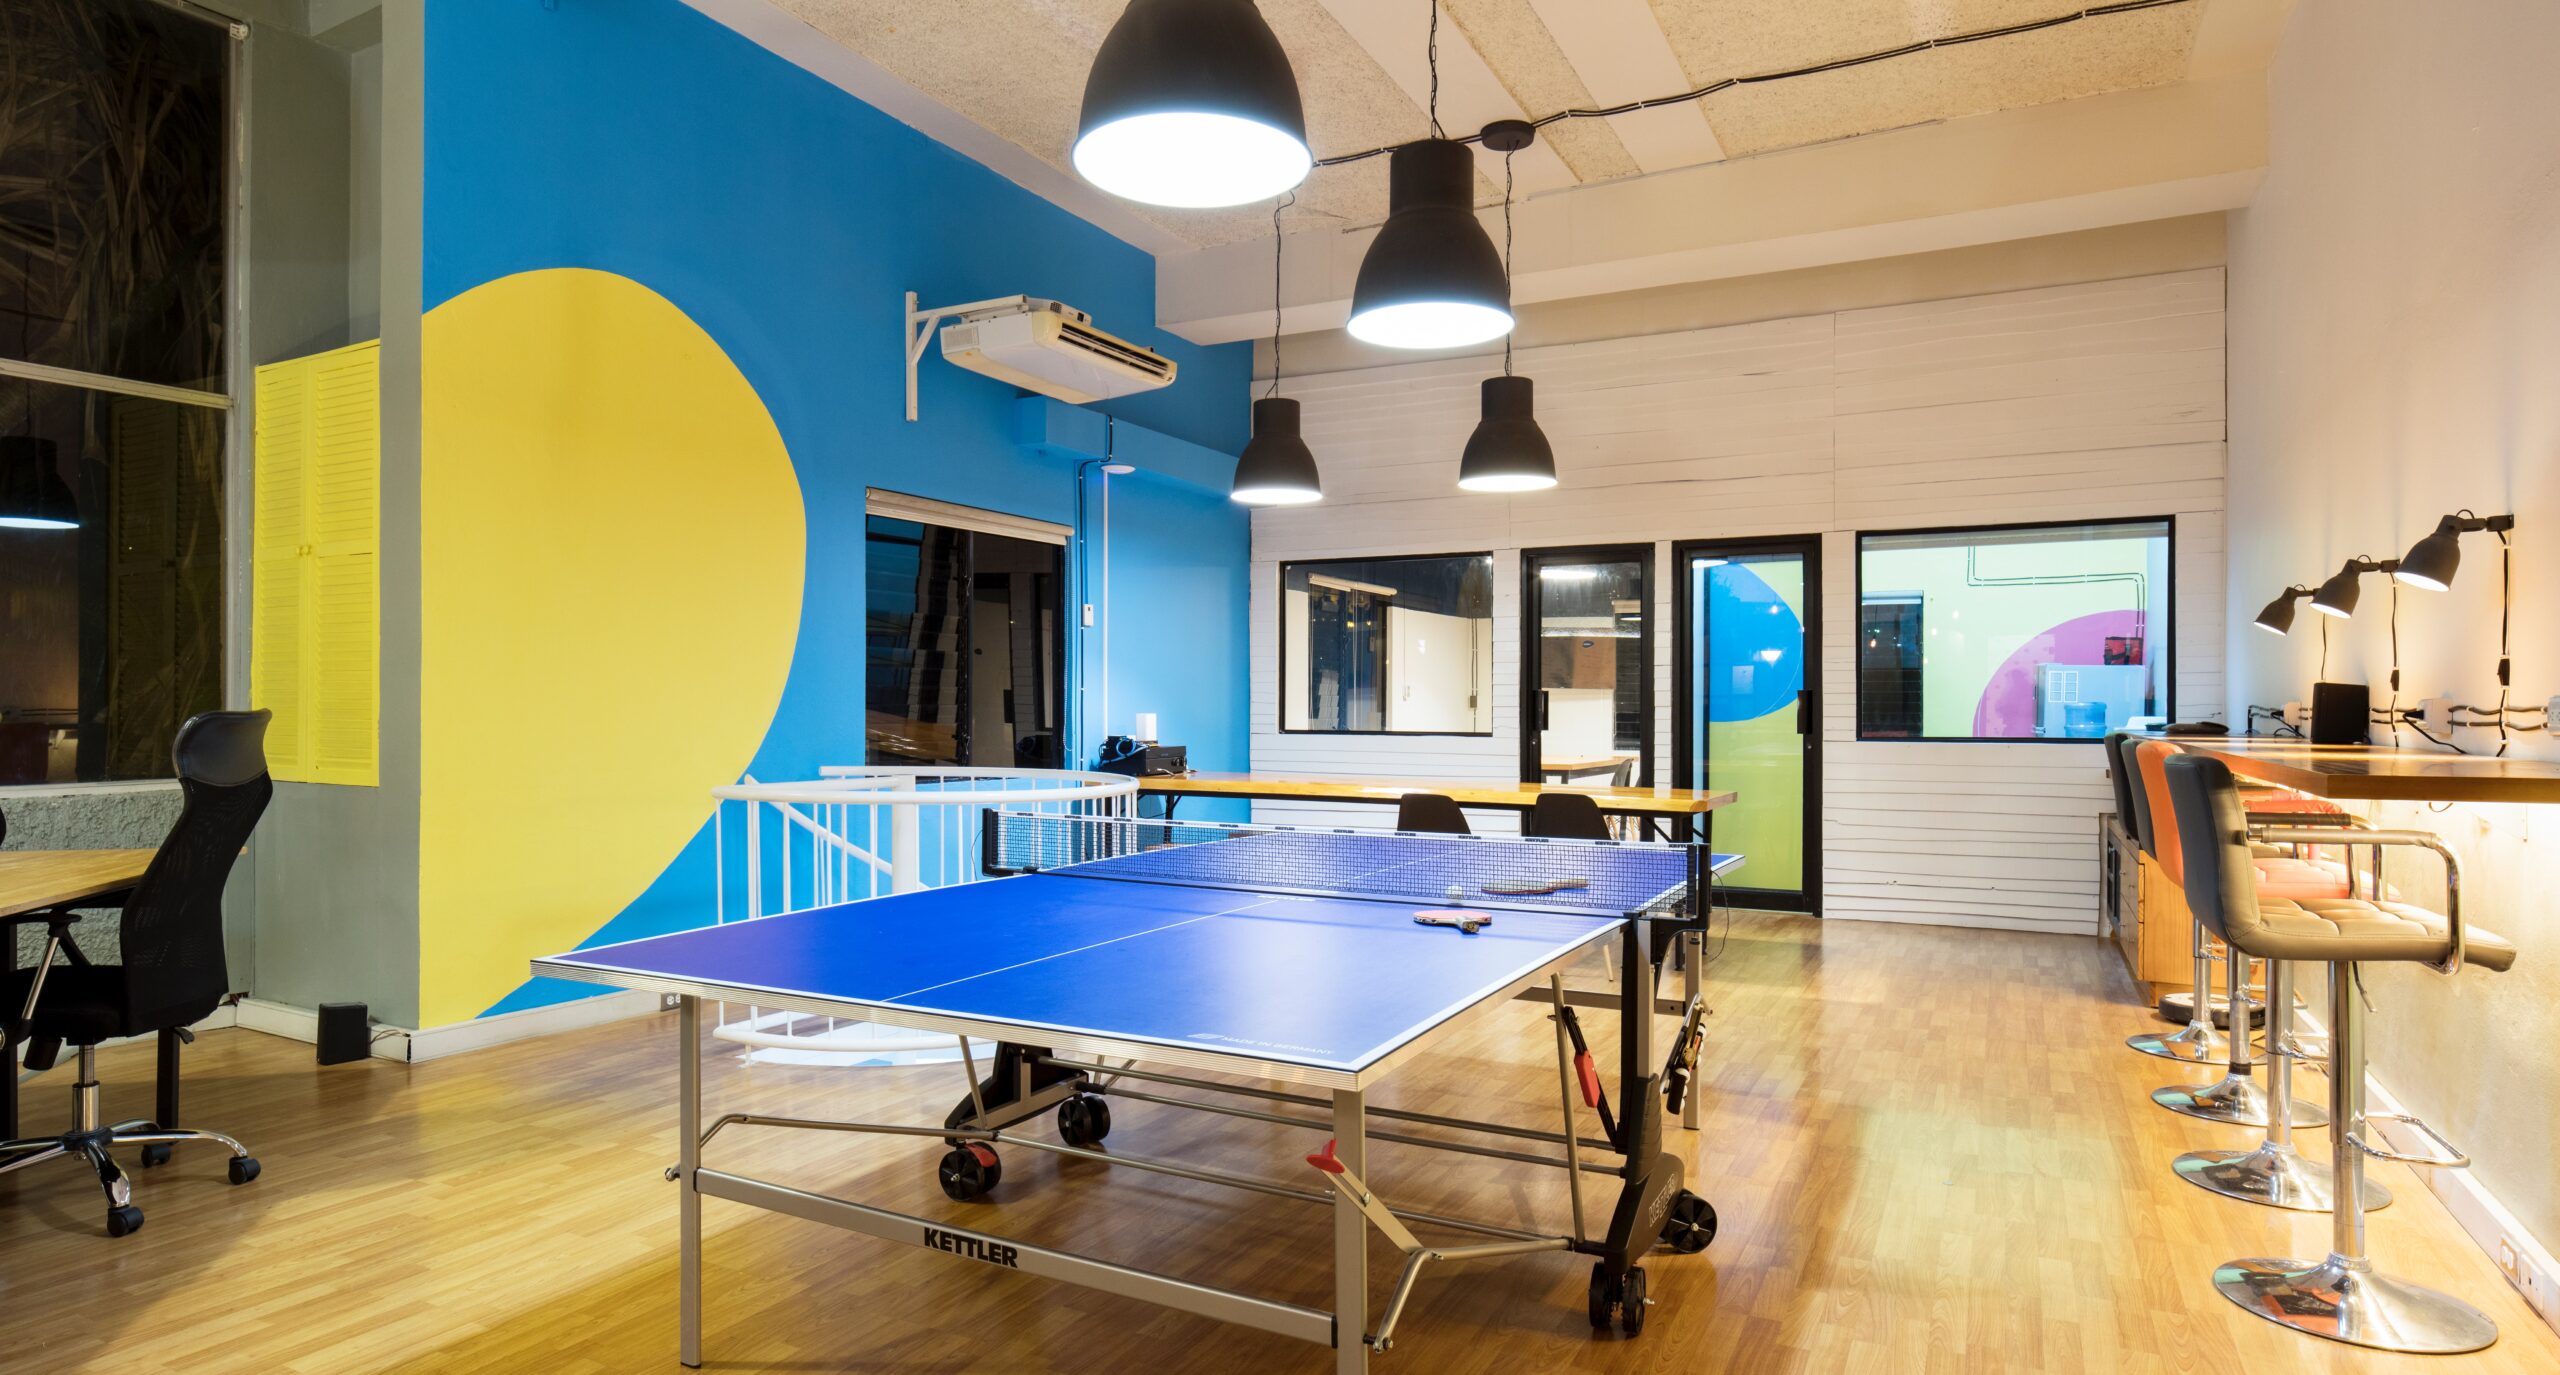 Ping pong tables